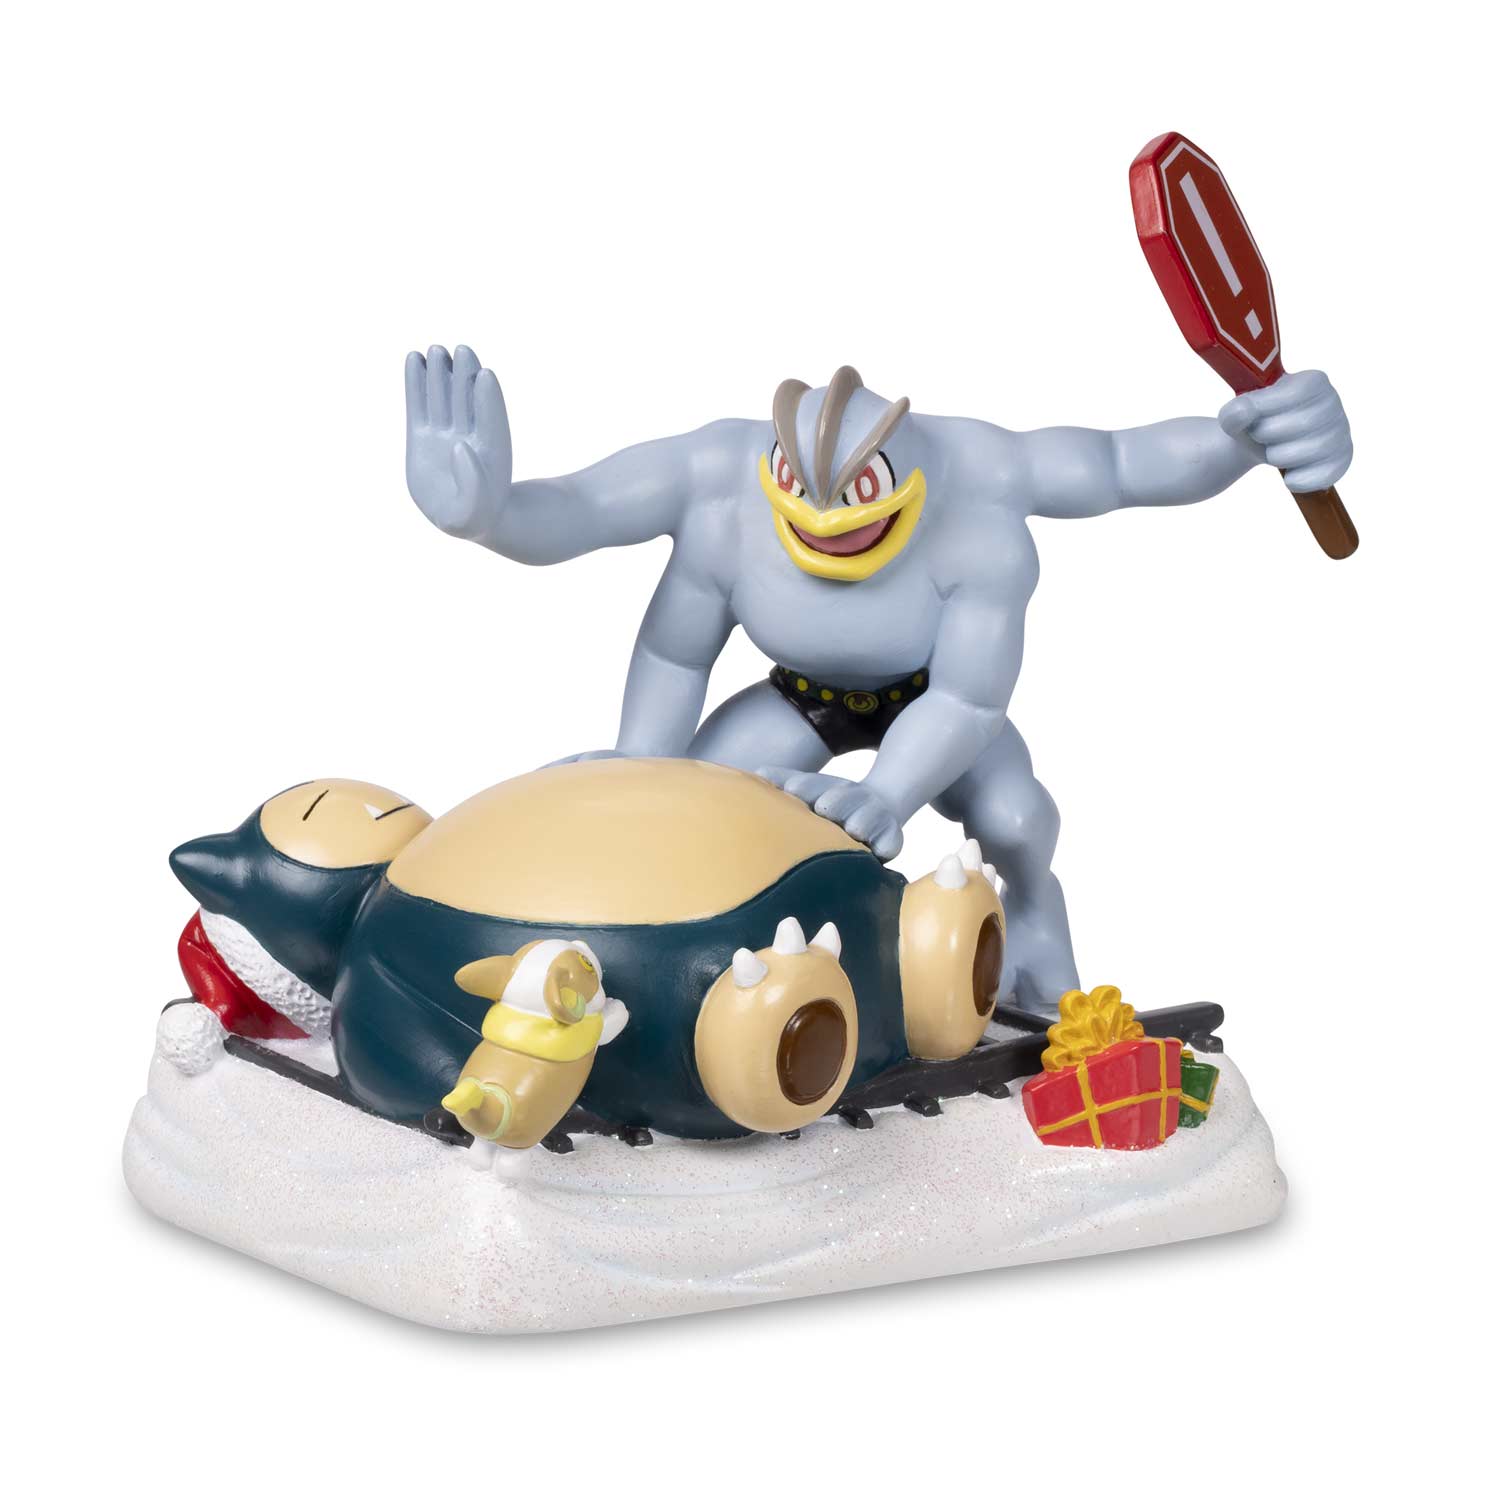 PC_Delibird_Holiday_Express_Snorlax_Pass_Figure_Product_Image.jpg